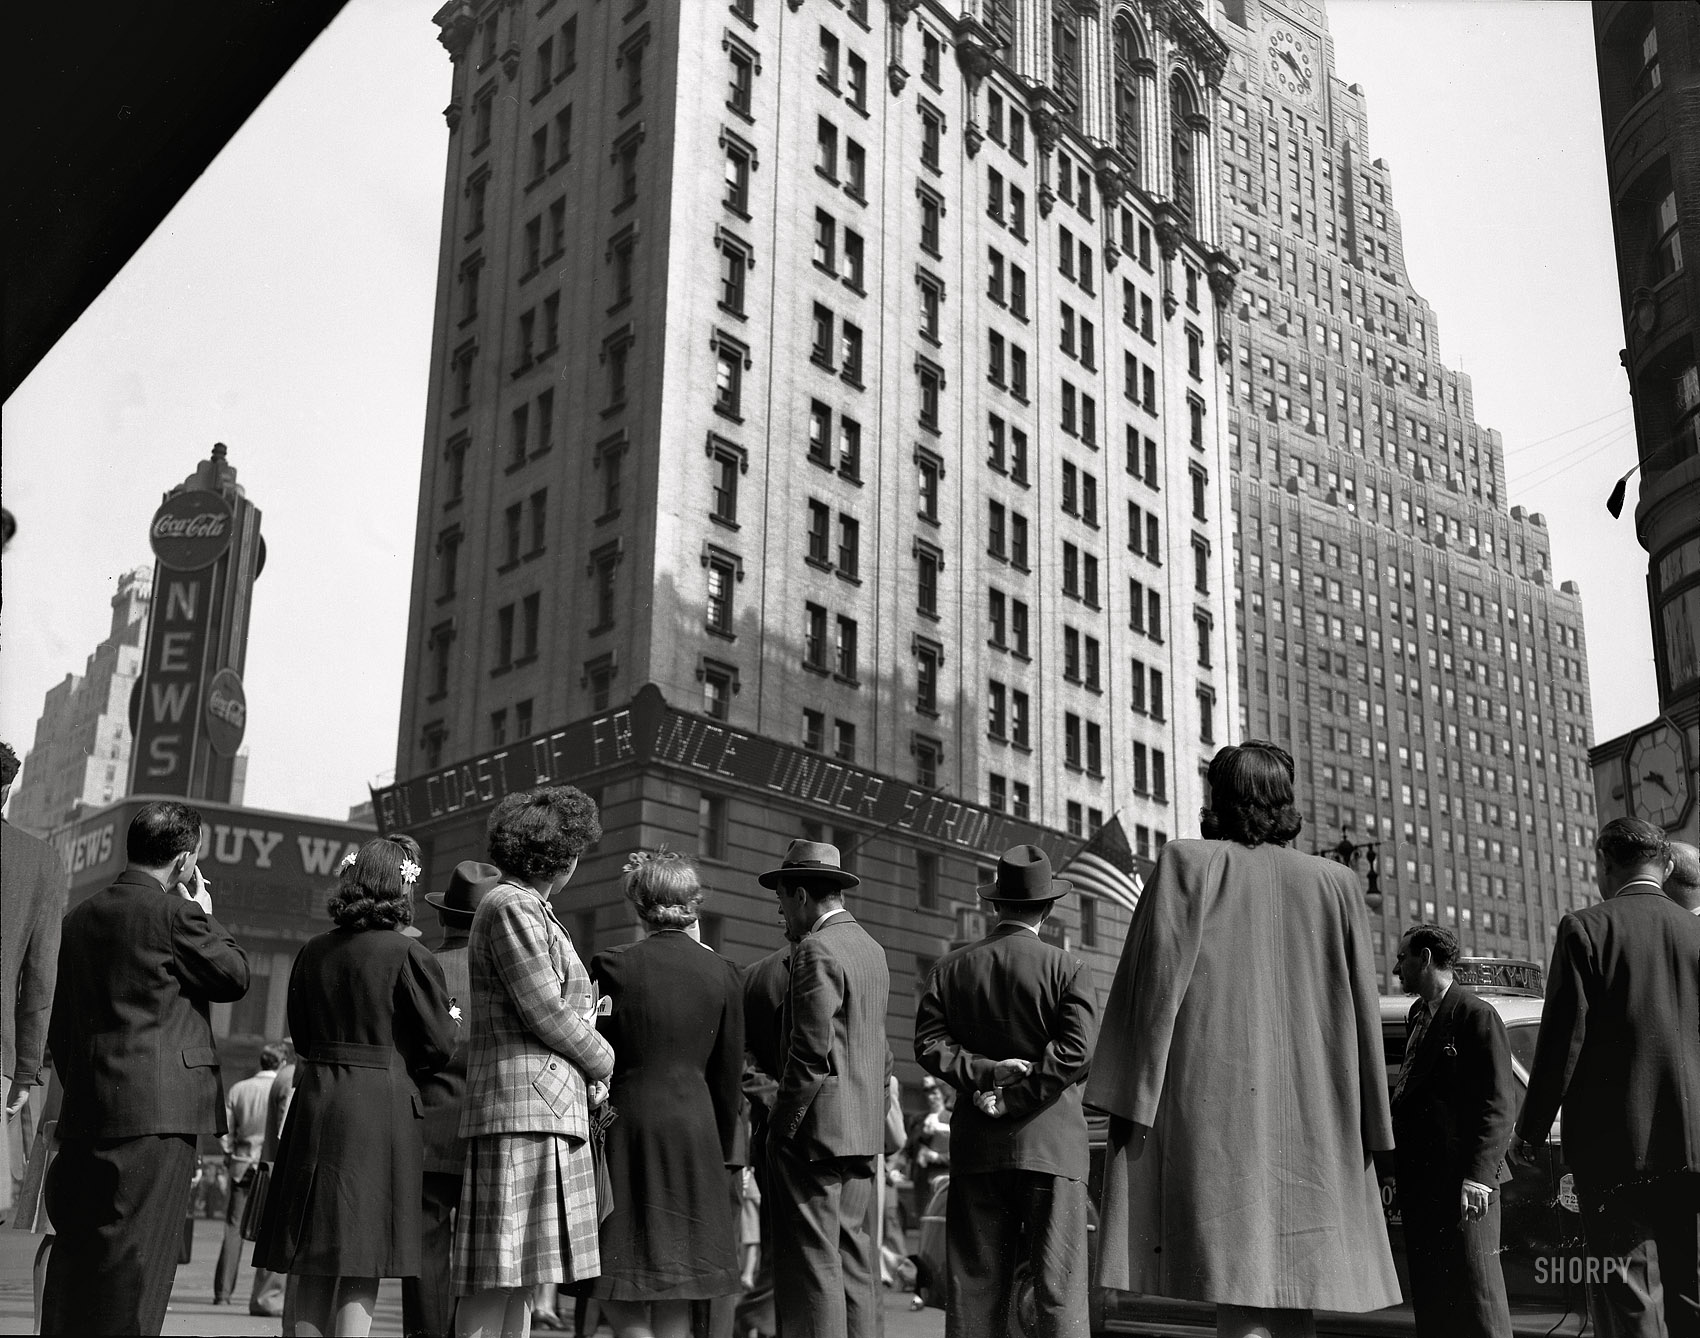 New York, June 6, 1944. ALLIED ARMIES LAND ON COAST OF FRANCE. GREAT INVASION OF CONTINENT BEGINS. "D-Day. Crowd watching the news line on the New York Times building at Times Square." Photo by Howard Hollem or Edward Meyer for the Office of War Information. View full size.